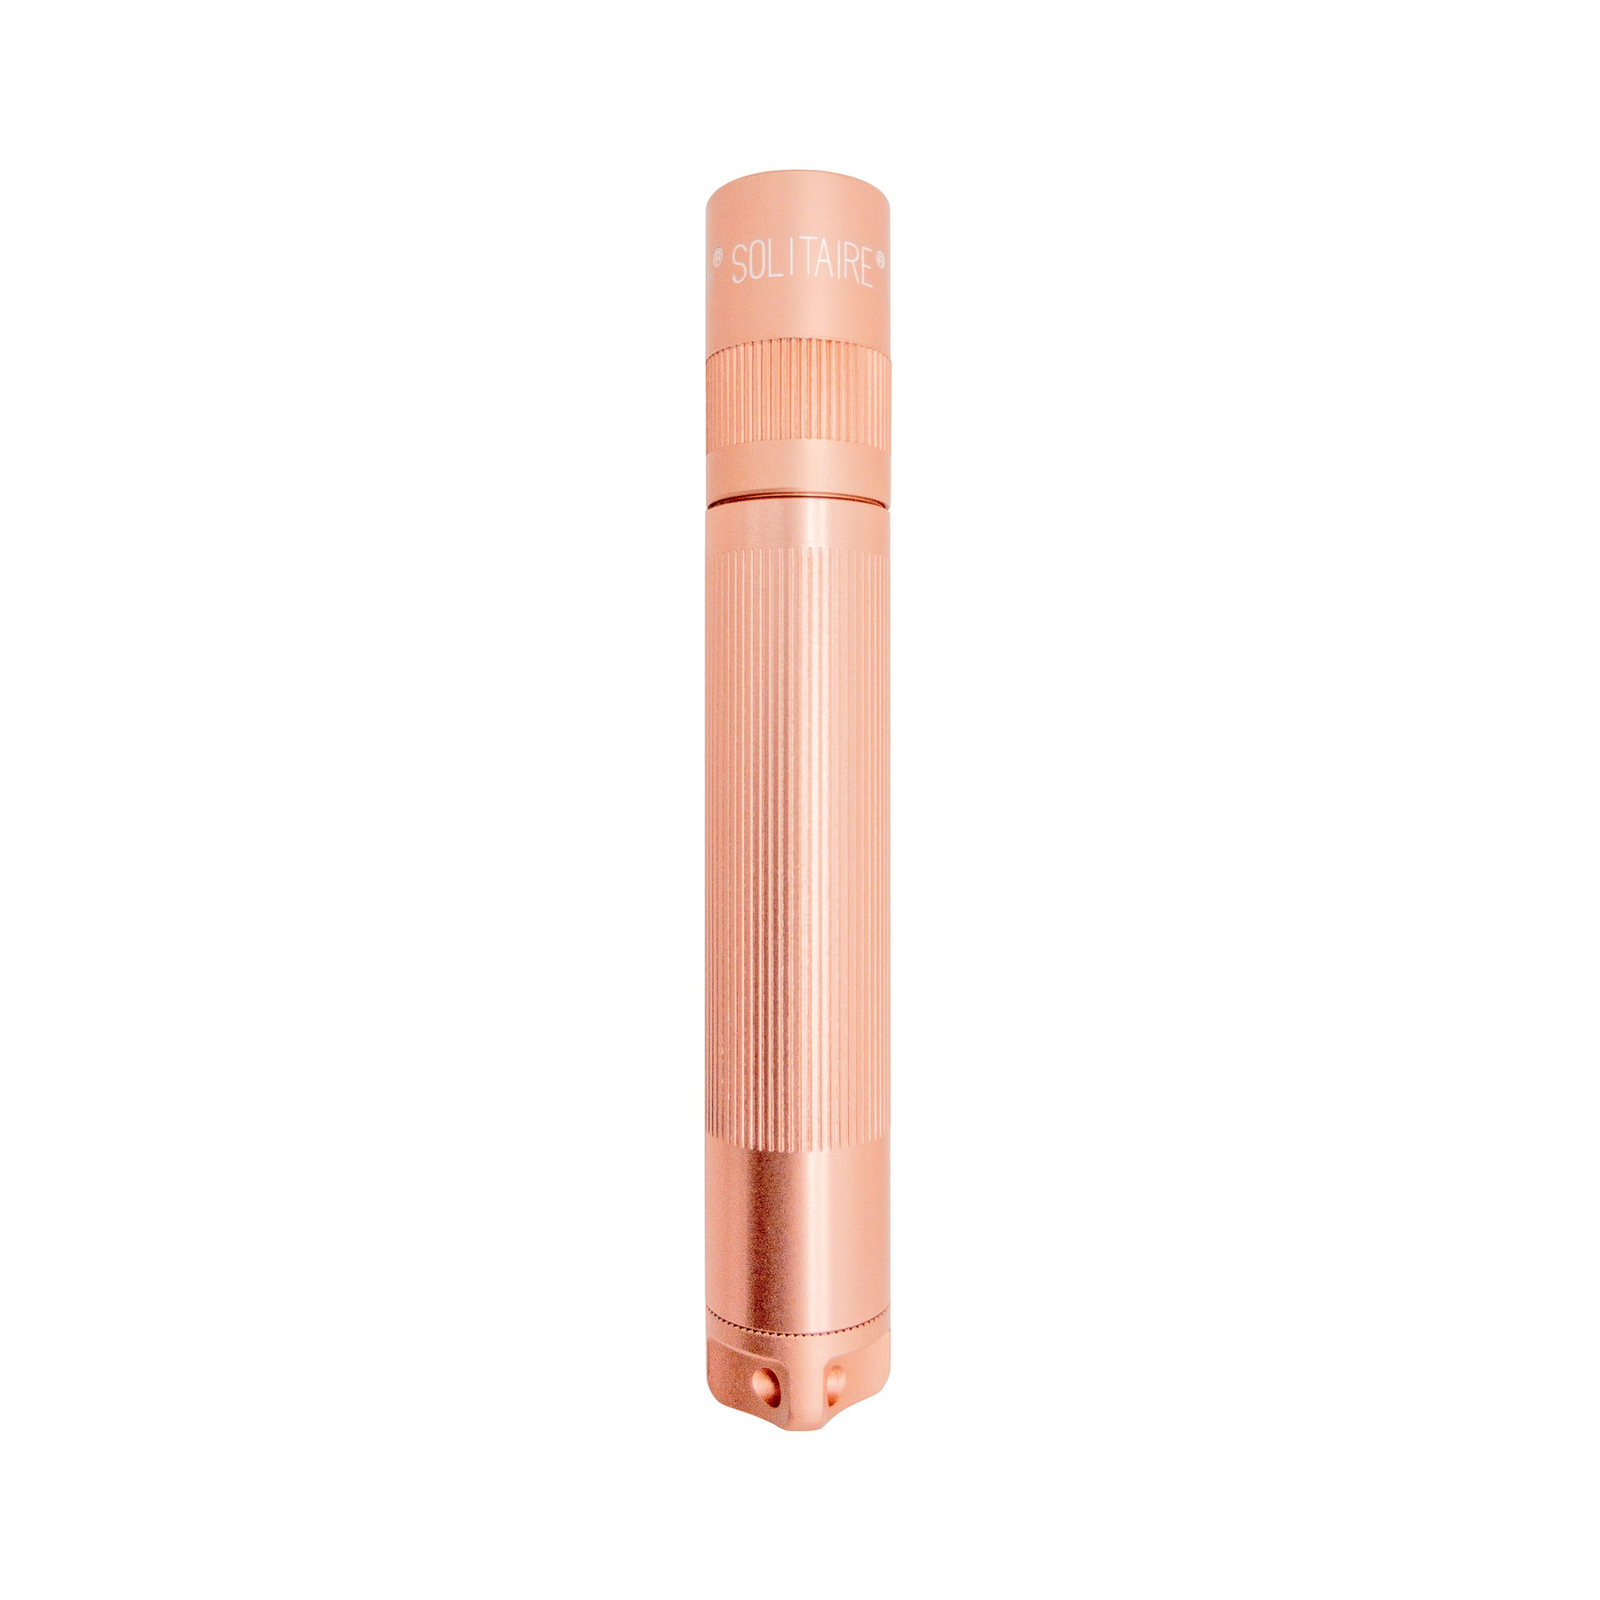 Torcia a LED Maglite Solitaire, 1 Cell AAA, Box, rosé